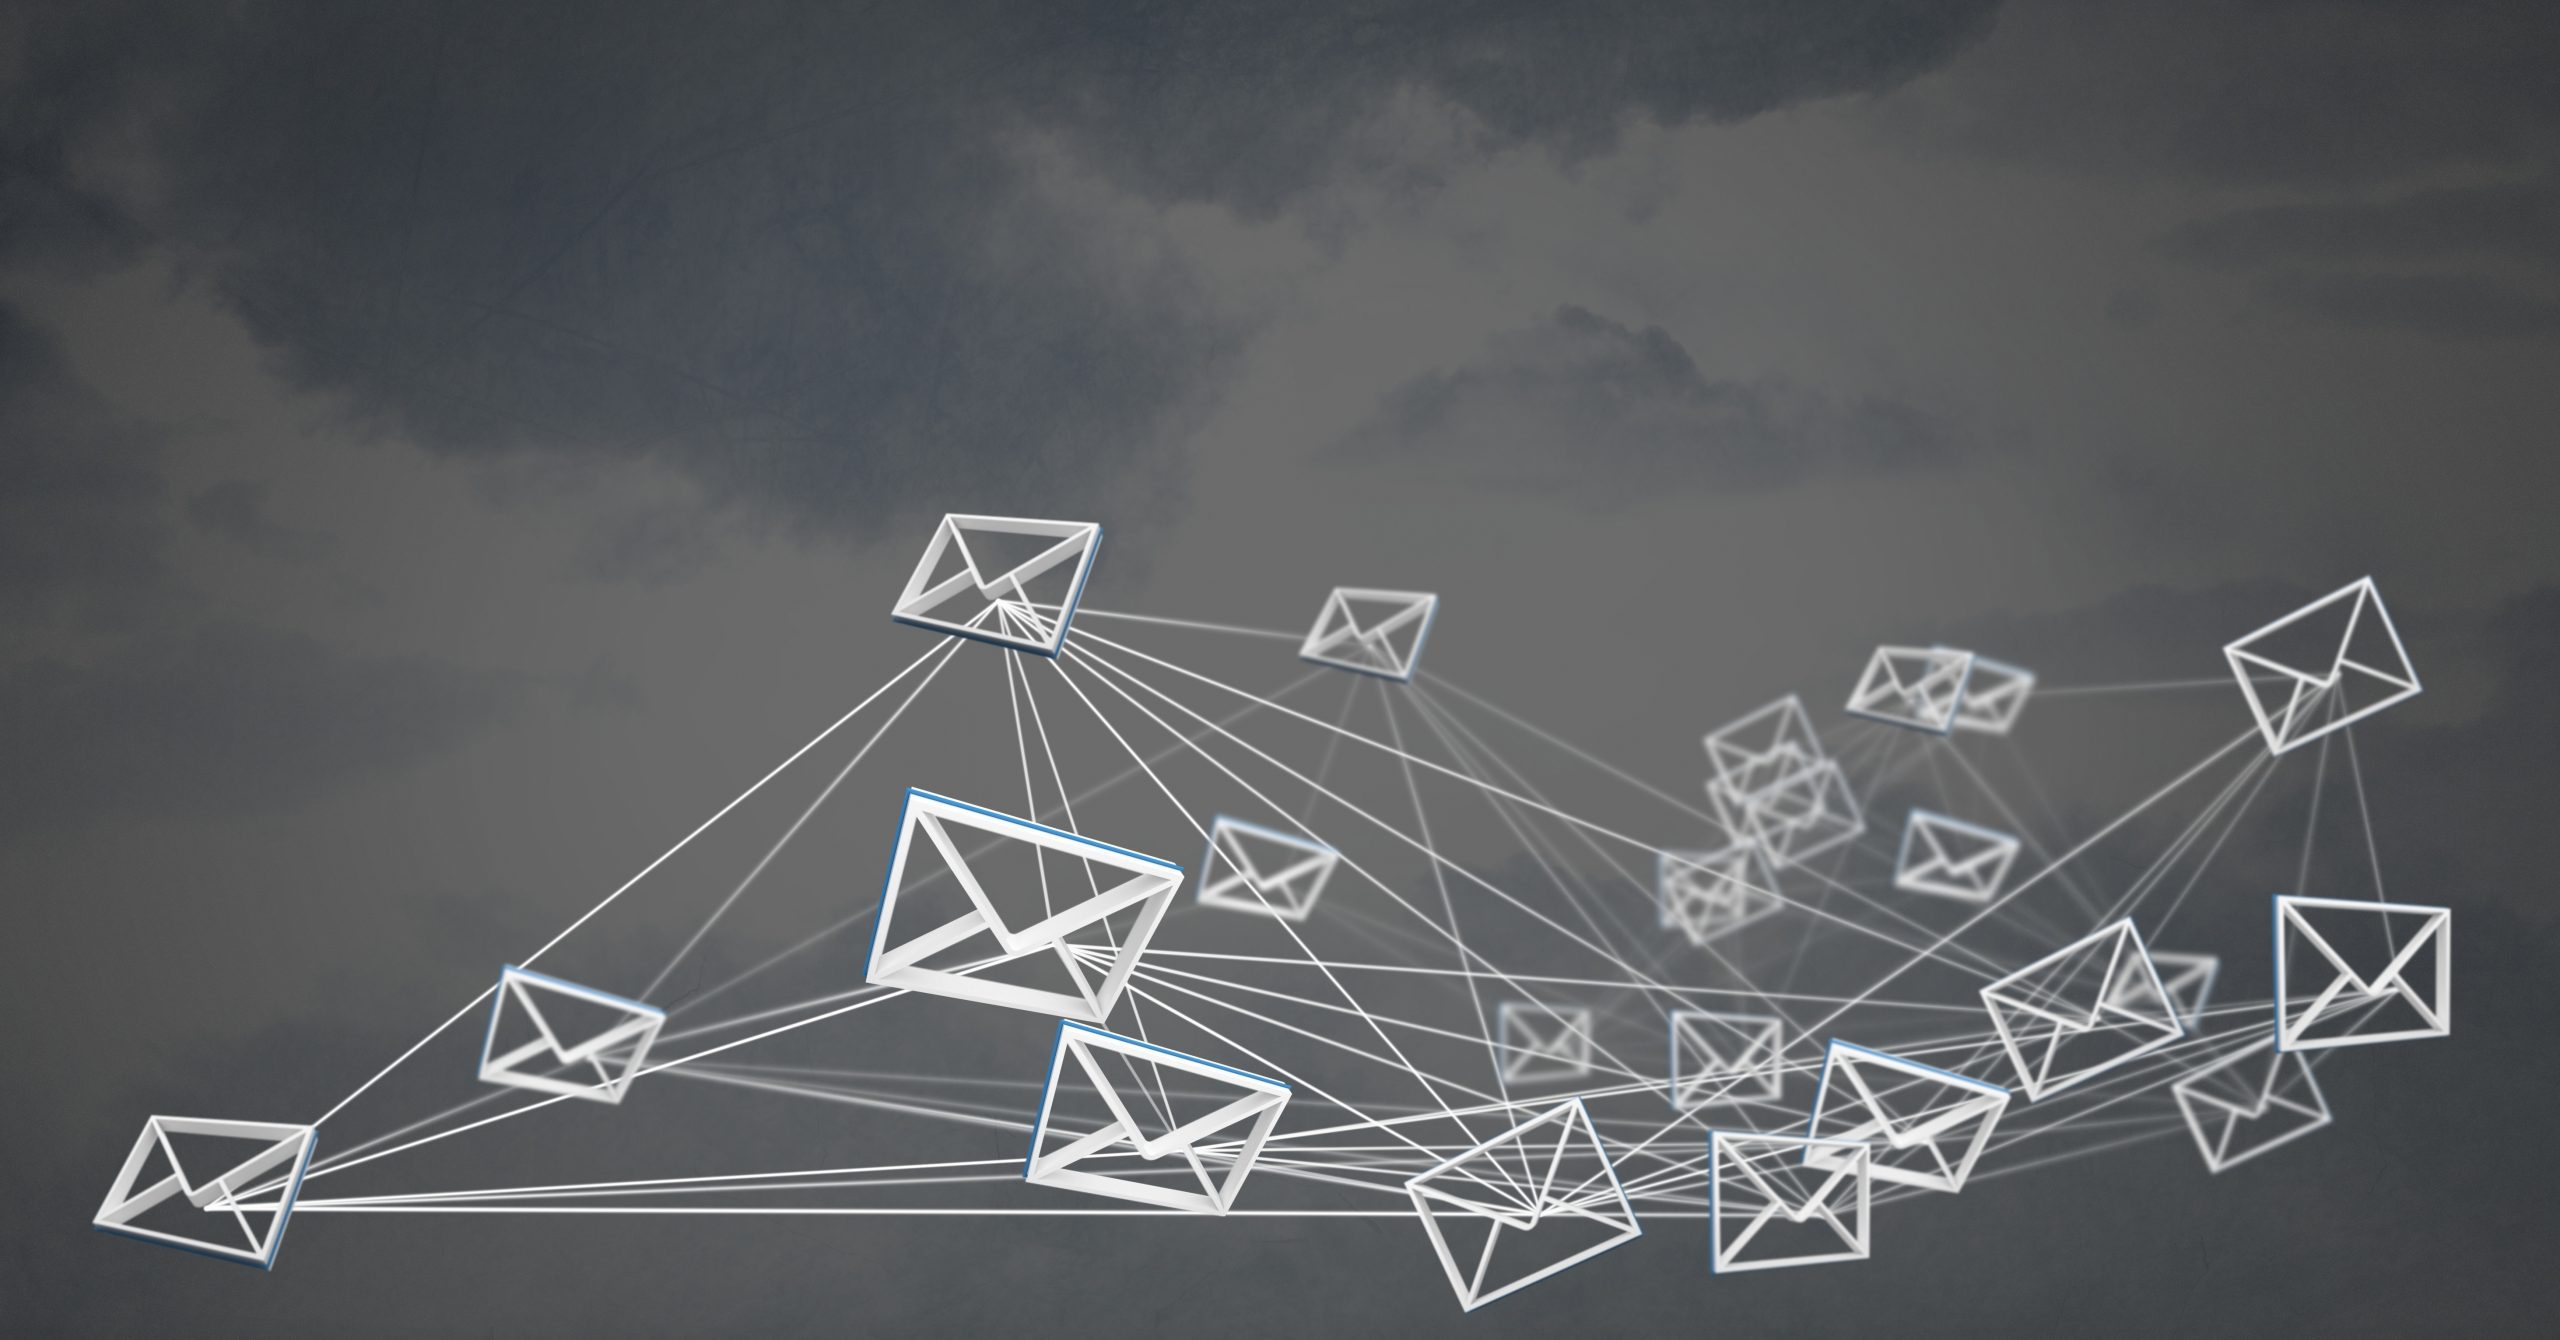 bunch of 3d emails flying through sky, symbollizing affiliate email marketing